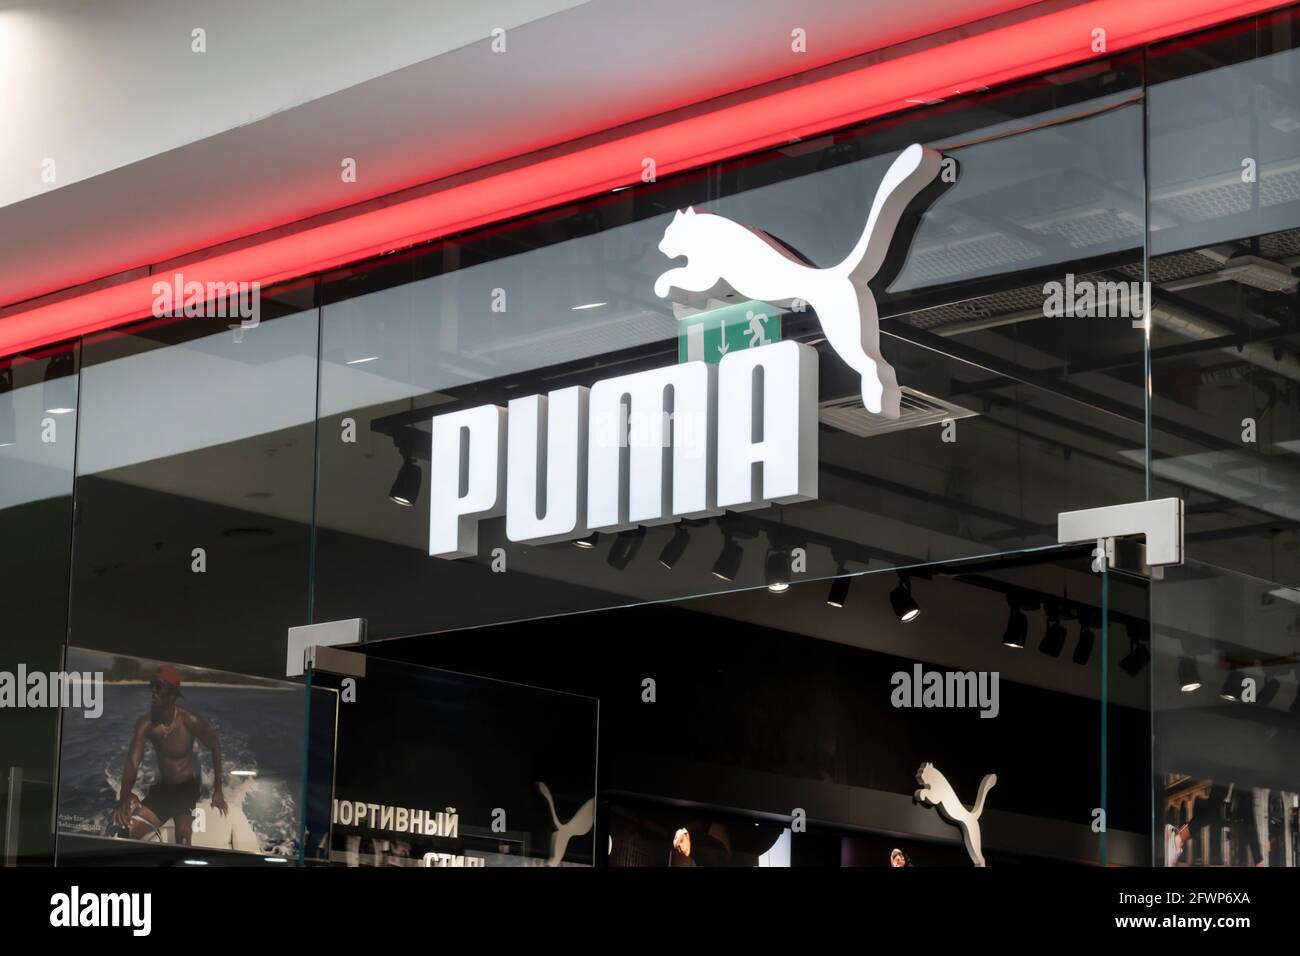 https://c8.alamy.com/comp/2FWP6XA/puma-brand-logo-a-sign-above-the-entrance-to-the-companys-brand-store-for-the-production-of-sportswear-and-accessories-krasnoyarsk-russia-may-15-2FWP6XA.jpg